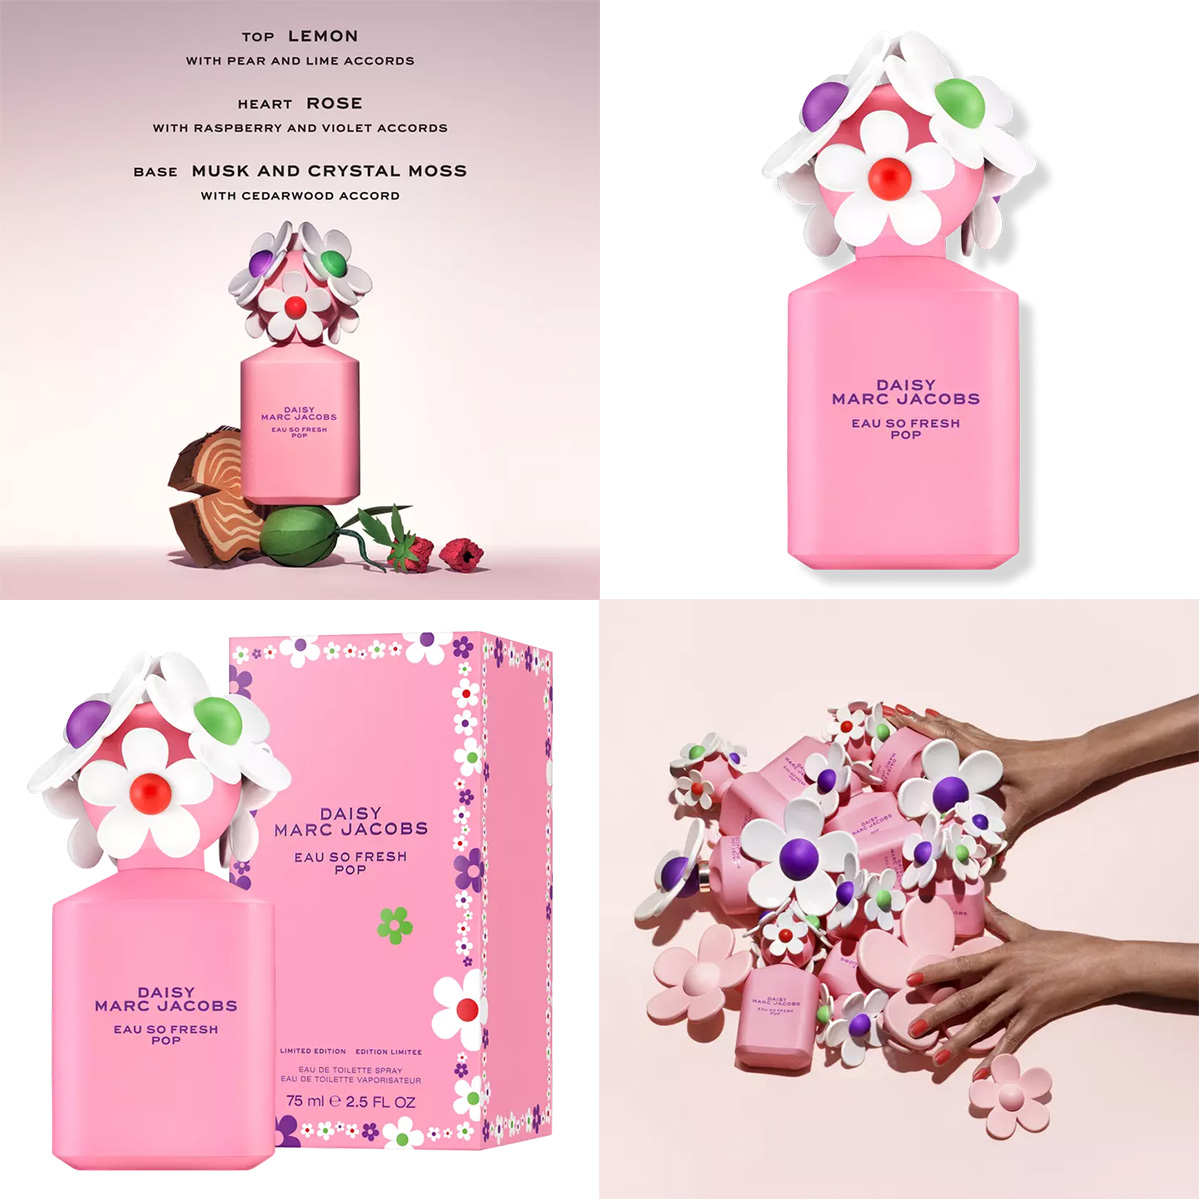 Marc Jacobs Daisy Eau So Fresh Pop fragrance bottle, packaging, and perfume ads